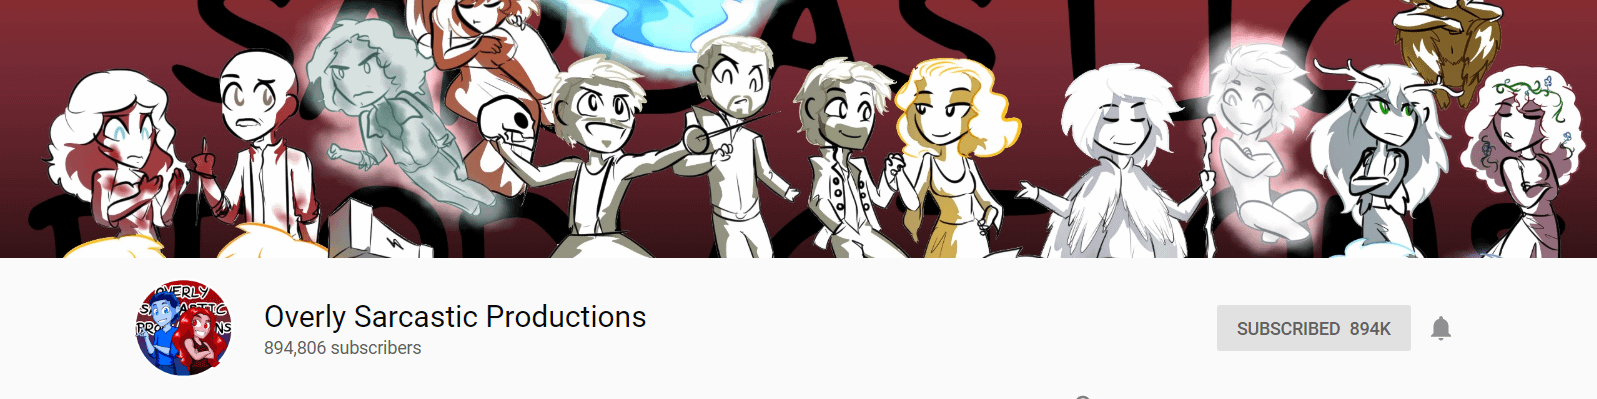 Best YouTube Banner Size: Example From Overly Sarcastic Productions